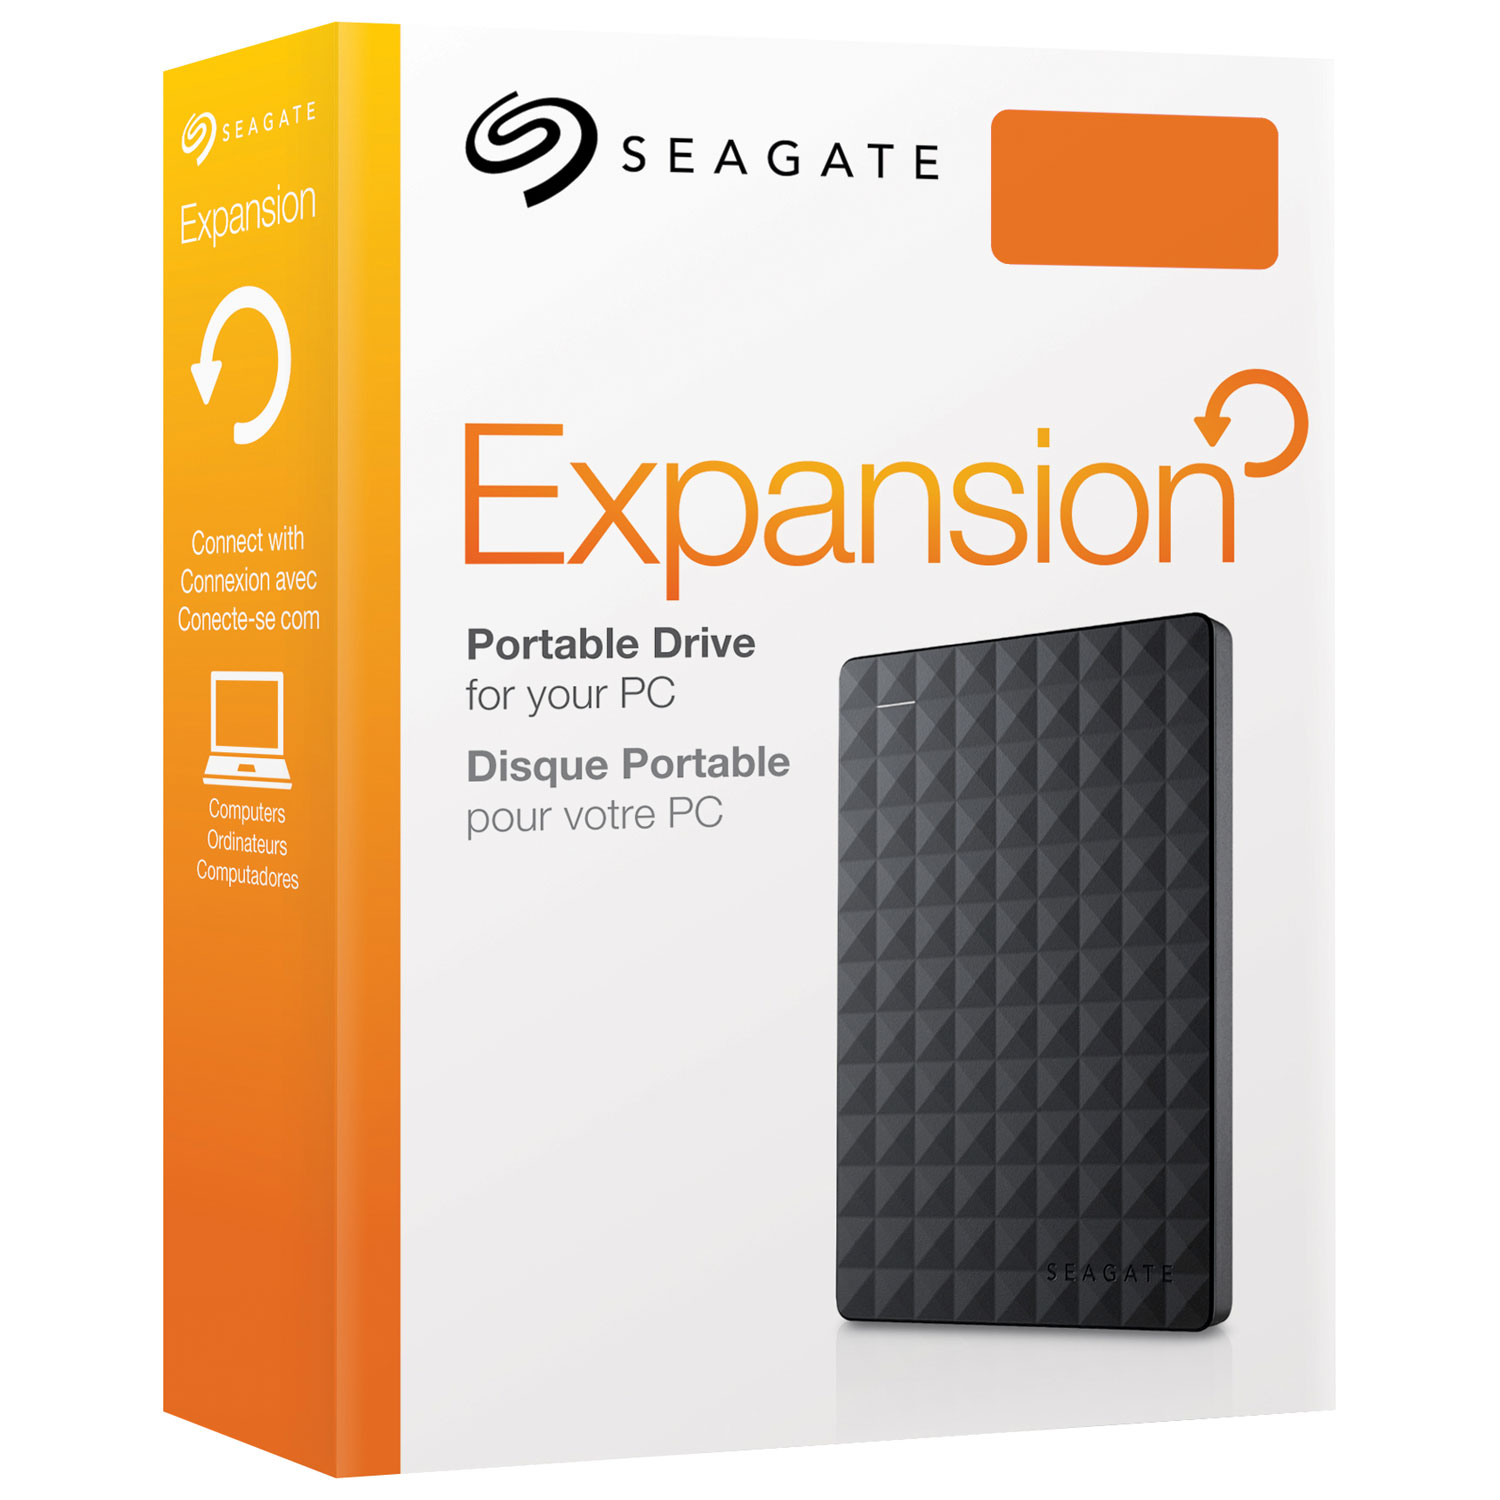 shall i format seagate expansion after bought